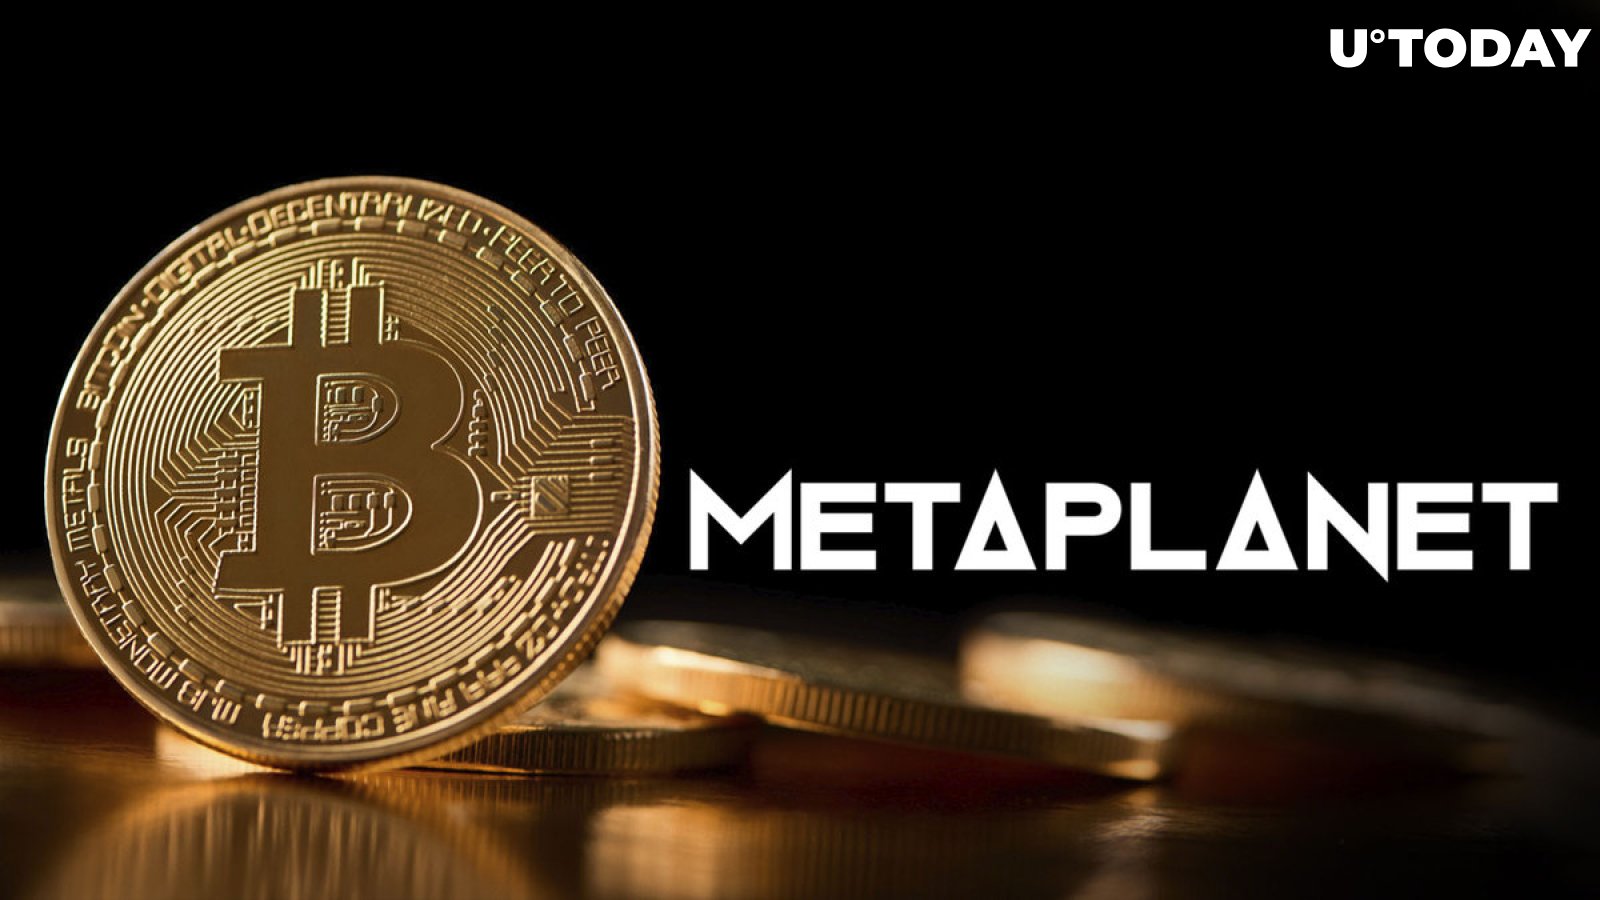 Metaplanet 'Asia's MicroStrategy' Completes Bitcoin Portfolio in Latest Purchase